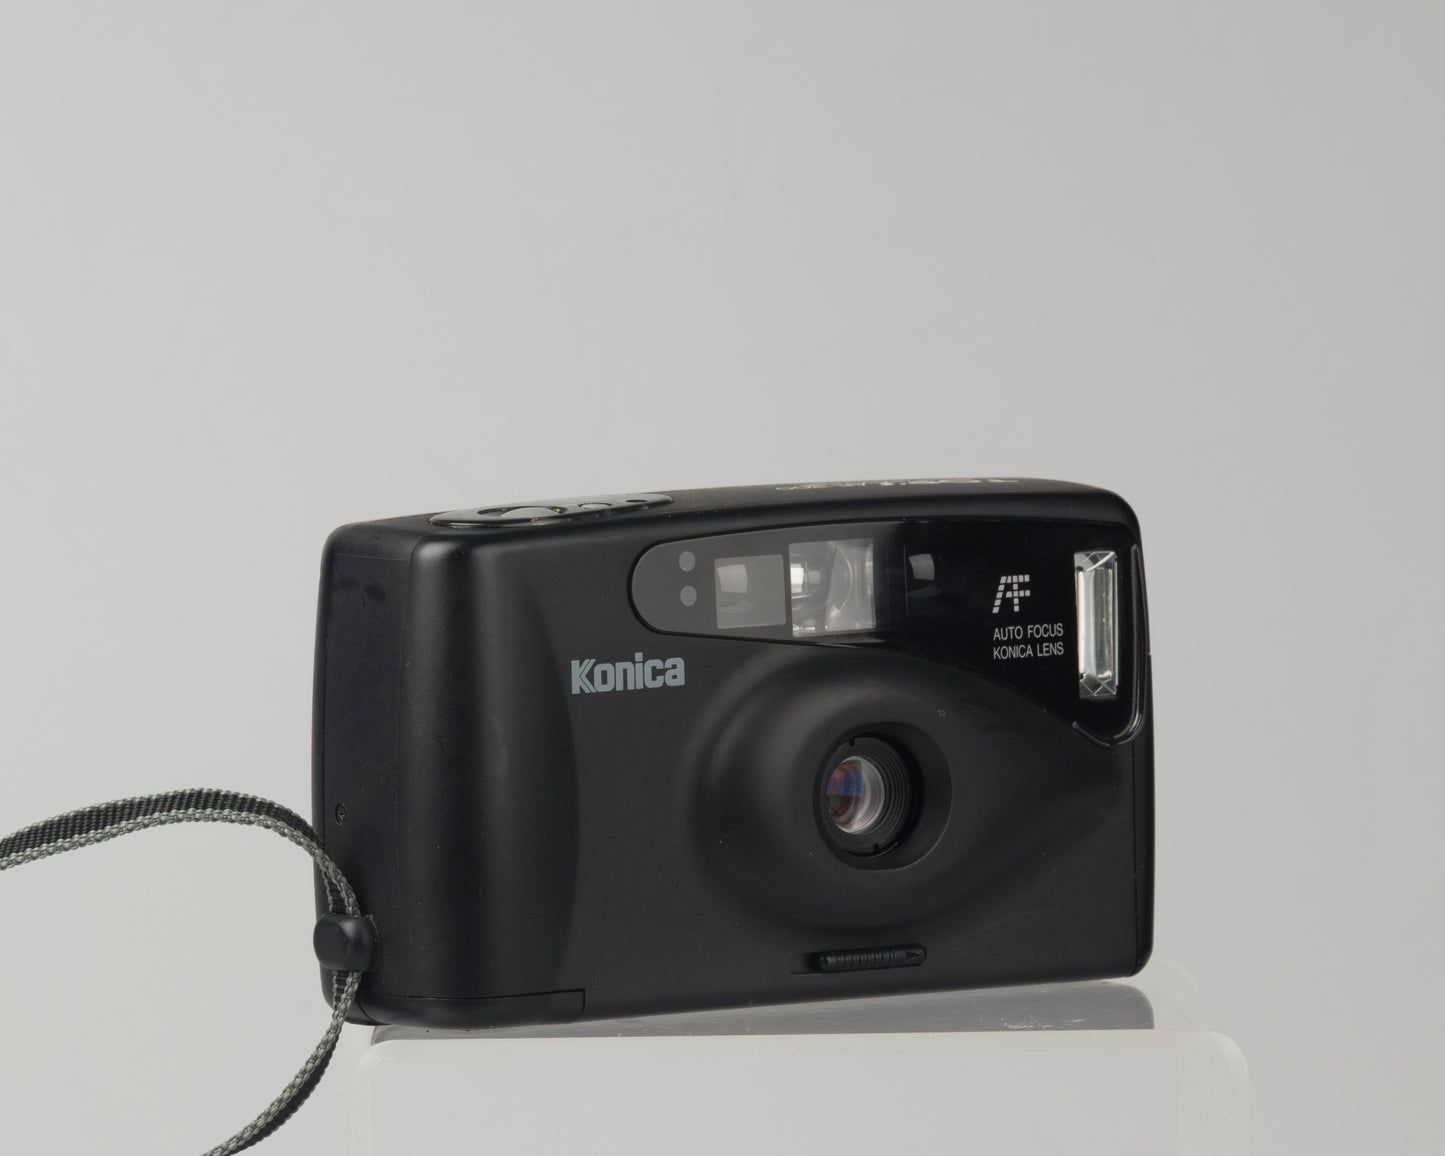 Konica TOP's AF-300 35mm point-and-shoot camera